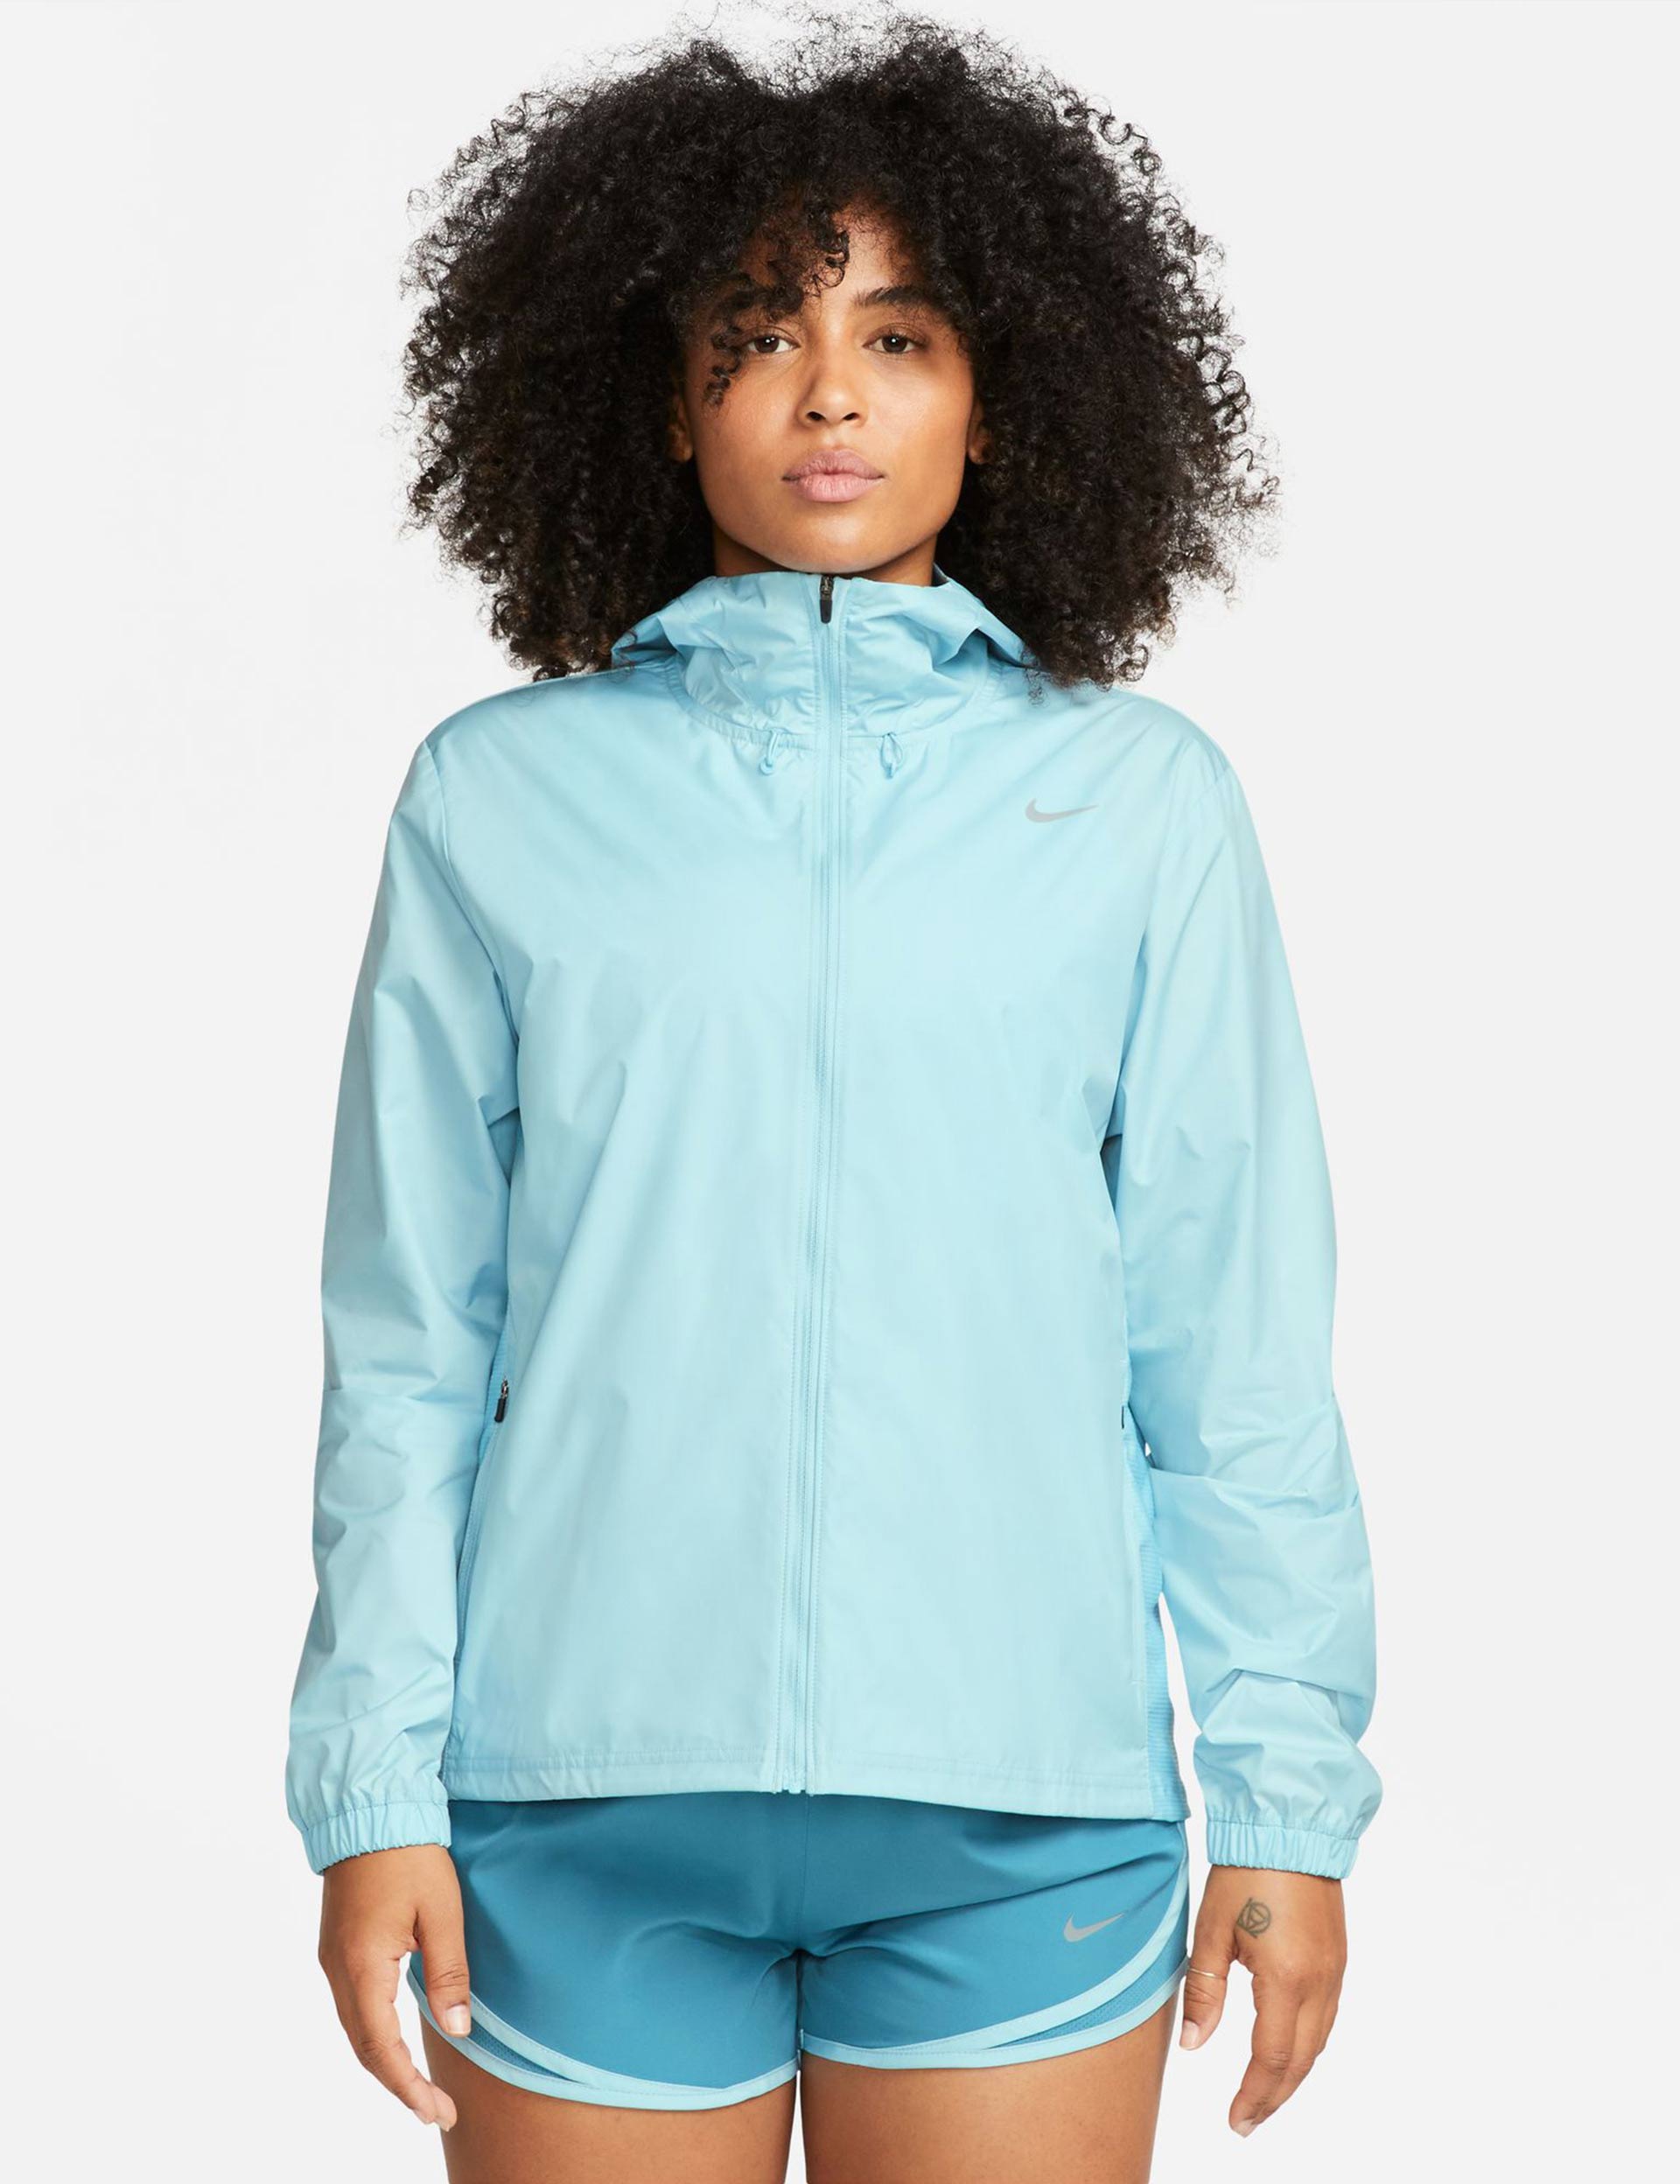 Nike Essential Running Jacket - Ocean Bliss/Reflective Silverimages1- The Sports Edit